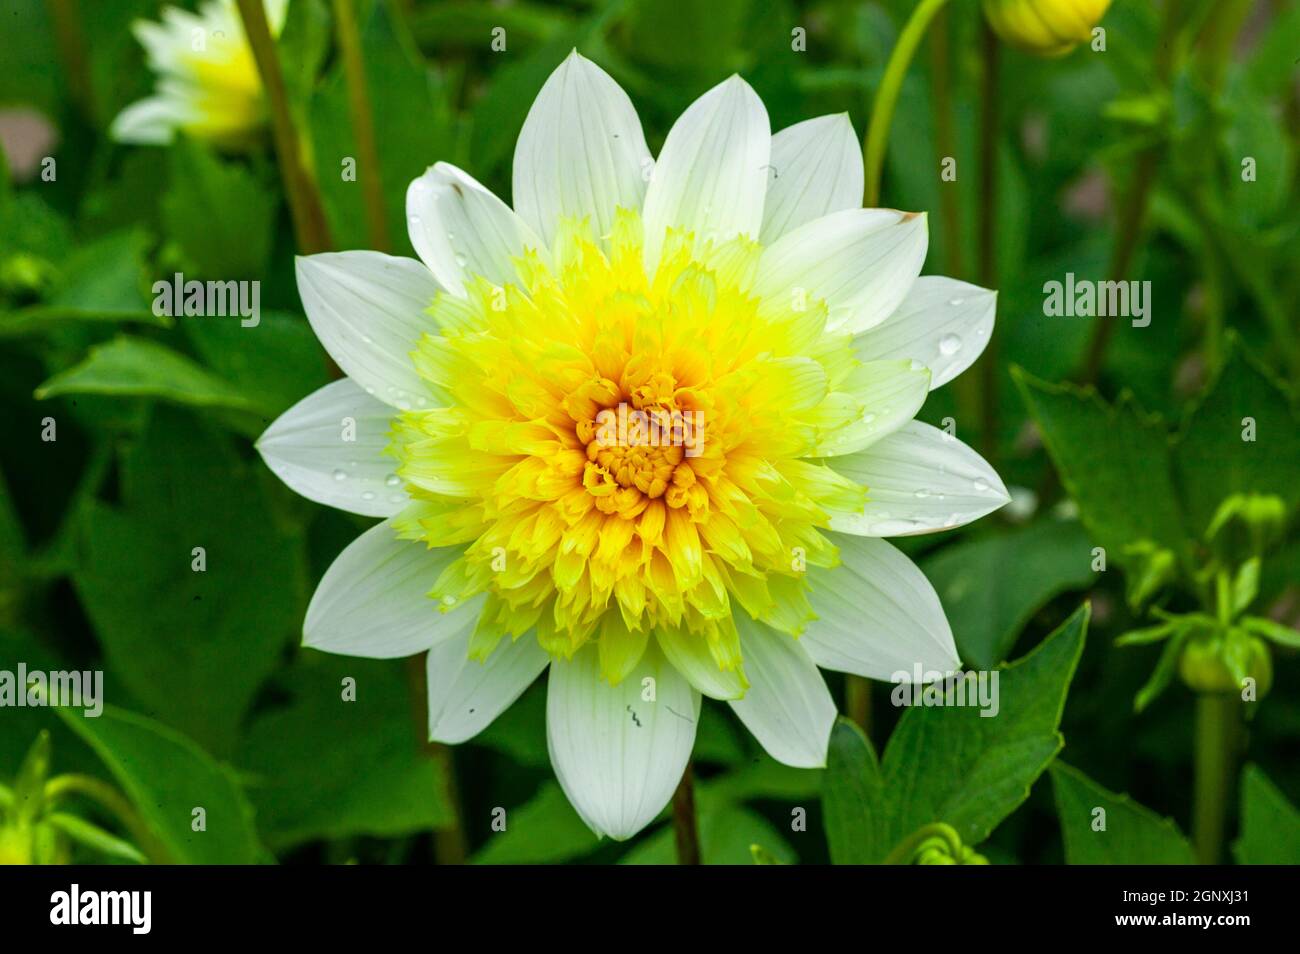 Doble High Resolution Photography and Images - Alamy